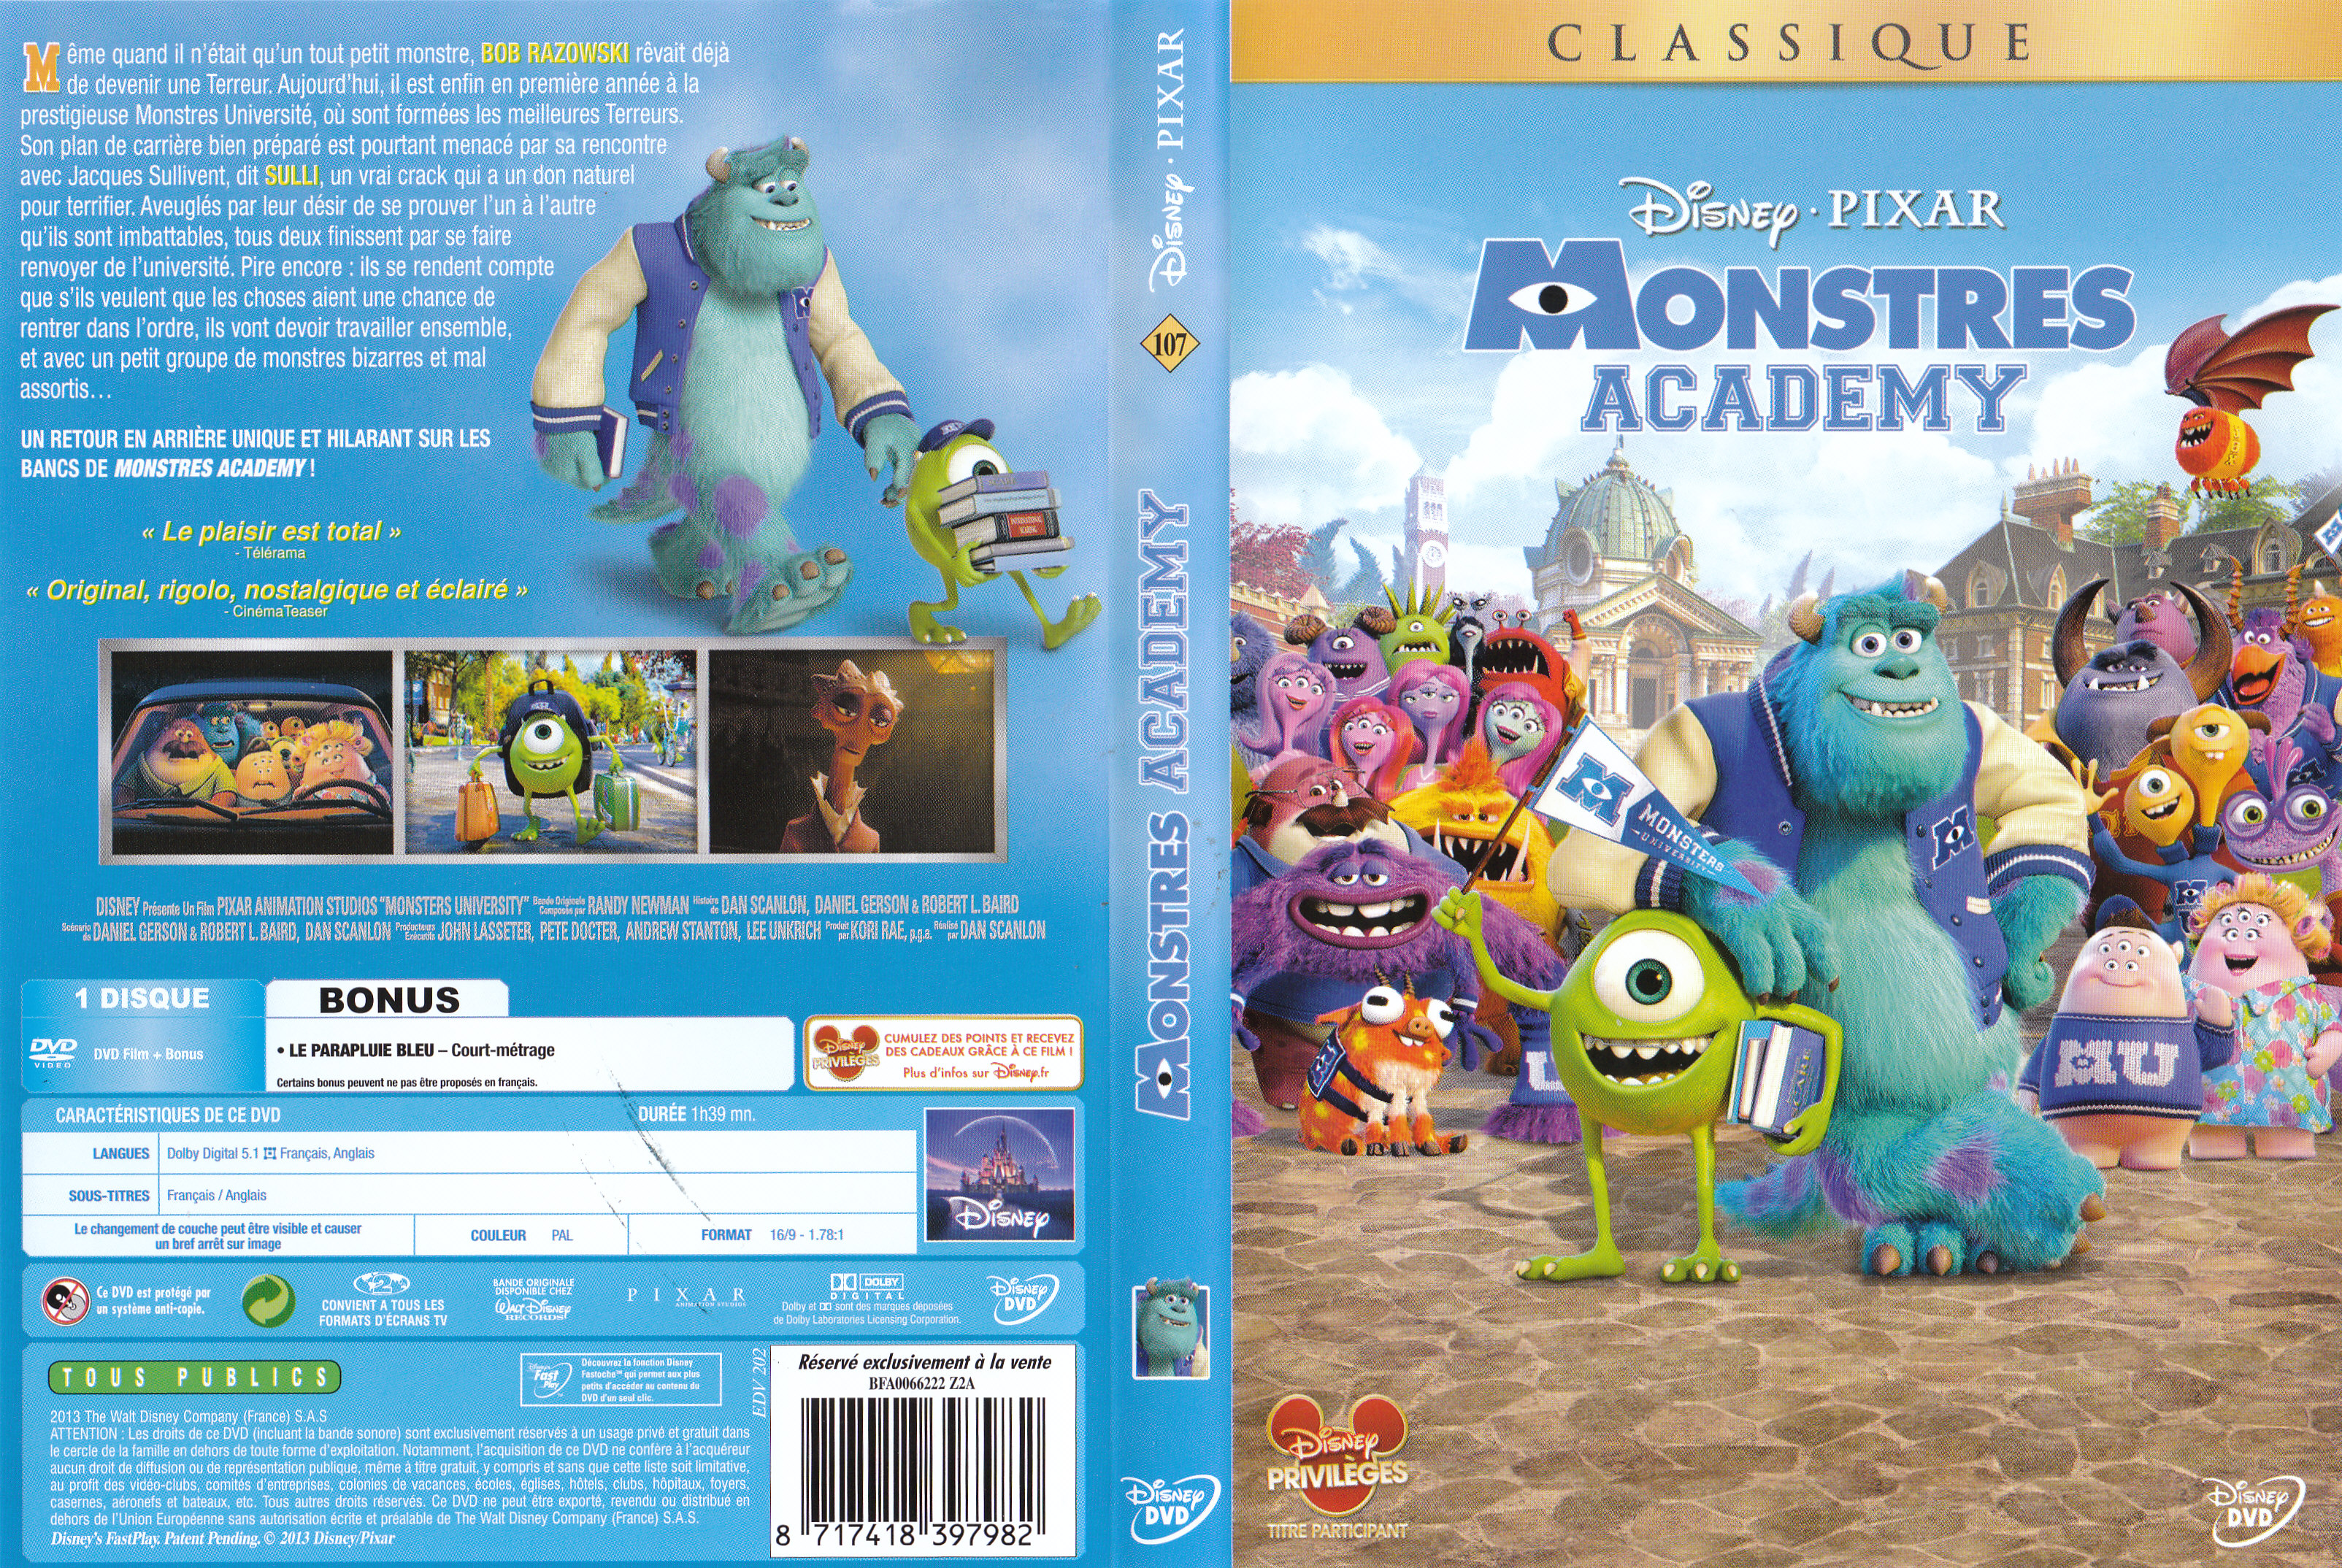 Jaquette DVD Monstres Academy